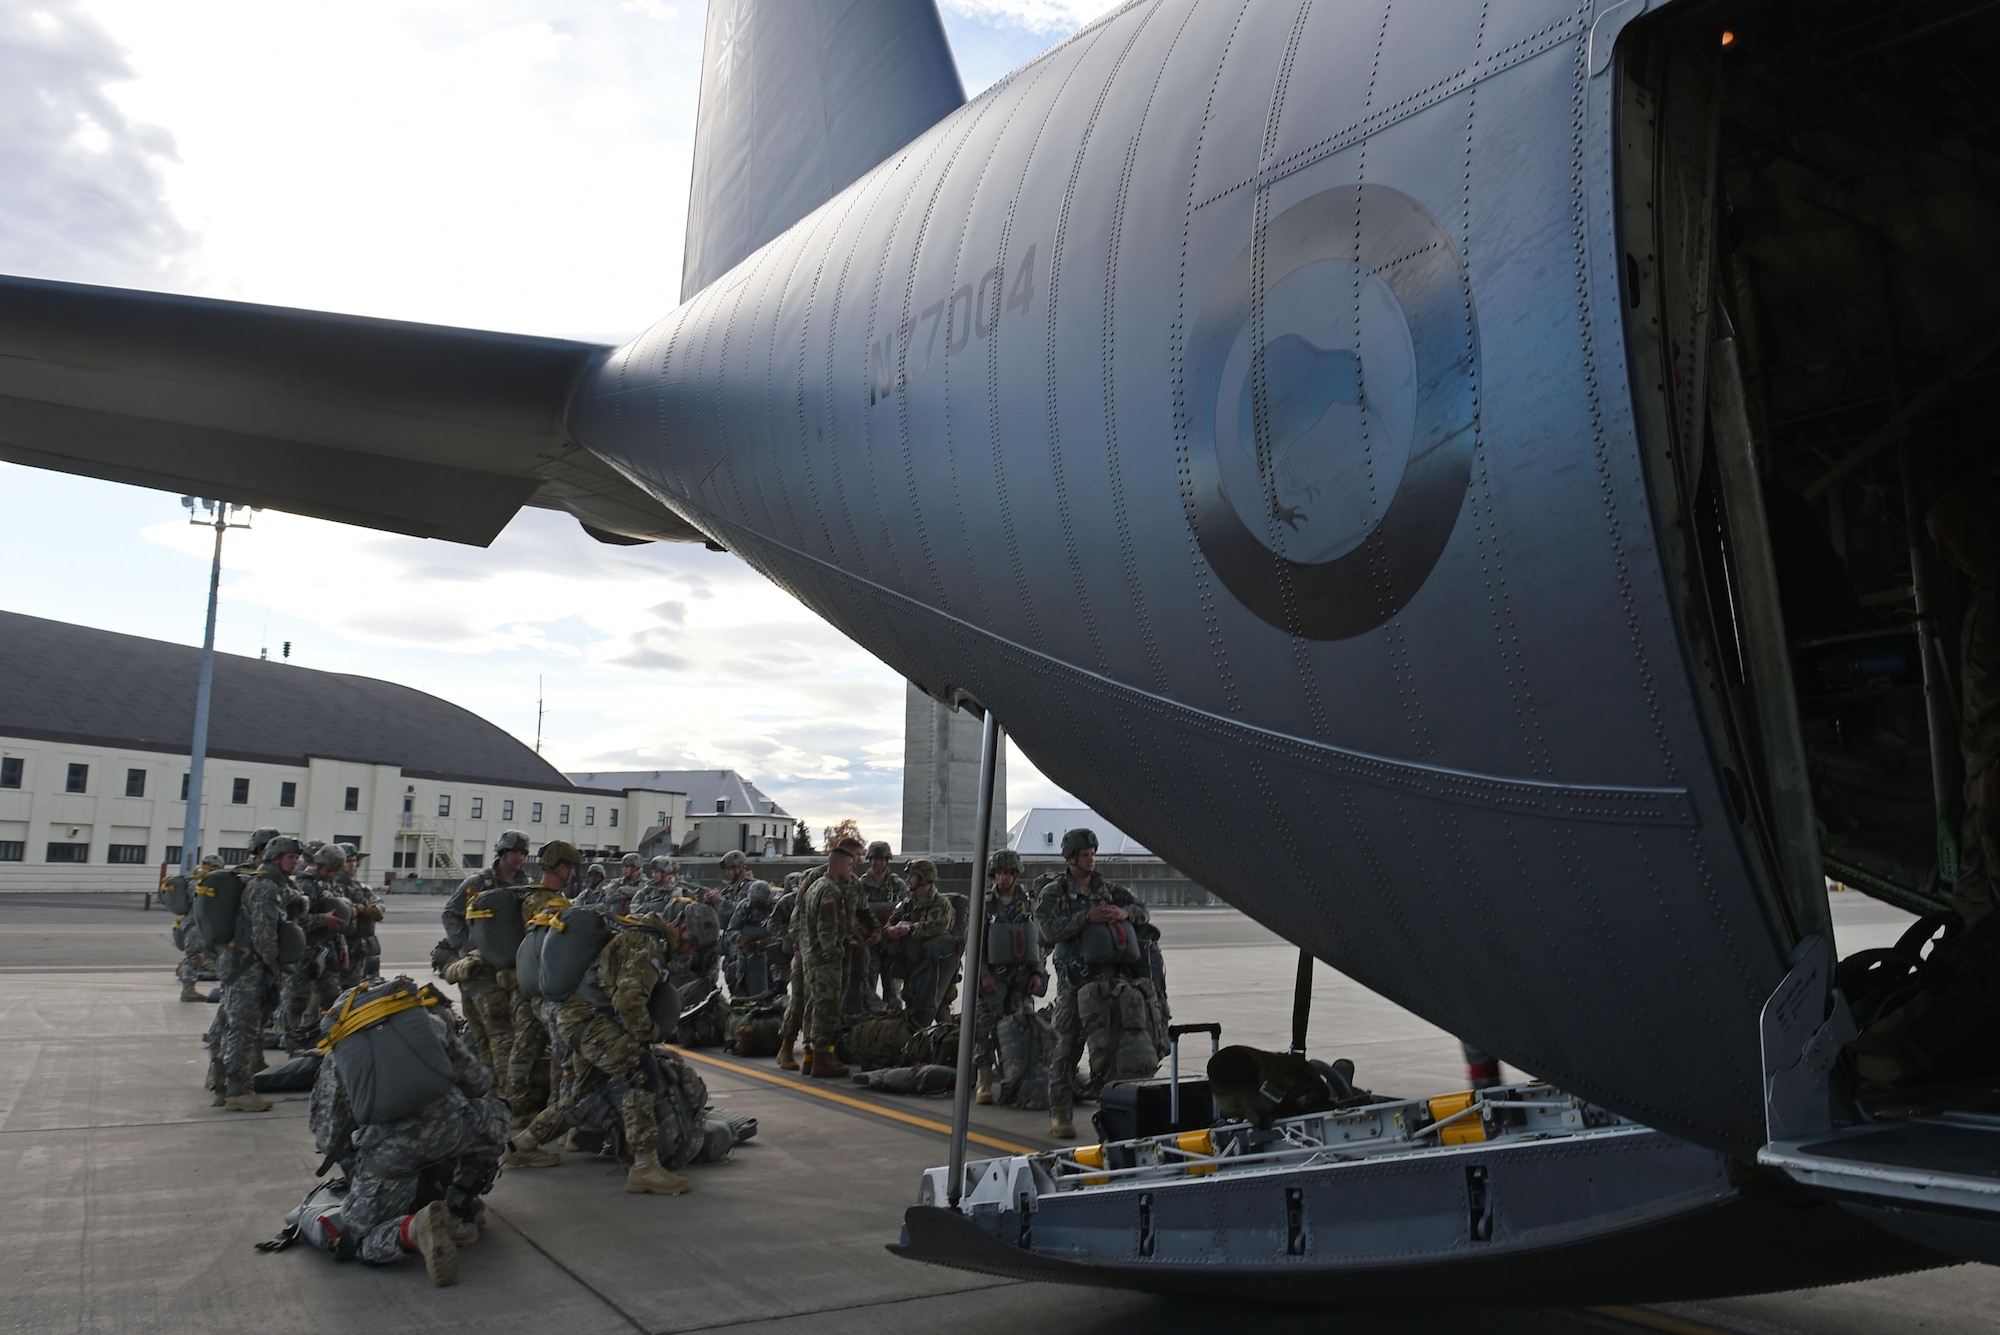 Paratroopers with the 4th Infantry Brigade Combat Team (Airborne), 25th Infantry Division, U.S. Army Alaska, prepare to board a Royal New Zealand Air Force C-130 Hercules during Red Flag Alaska 17-1 at Joint Base Elmendorf-Richardson, Alaska, Oct. 12, 2016. Red Flag-Alaska exercises are focused on improving the combat readiness of U.S. and international forces and providing training for units preparing for Air Expeditionary Force taskings. 